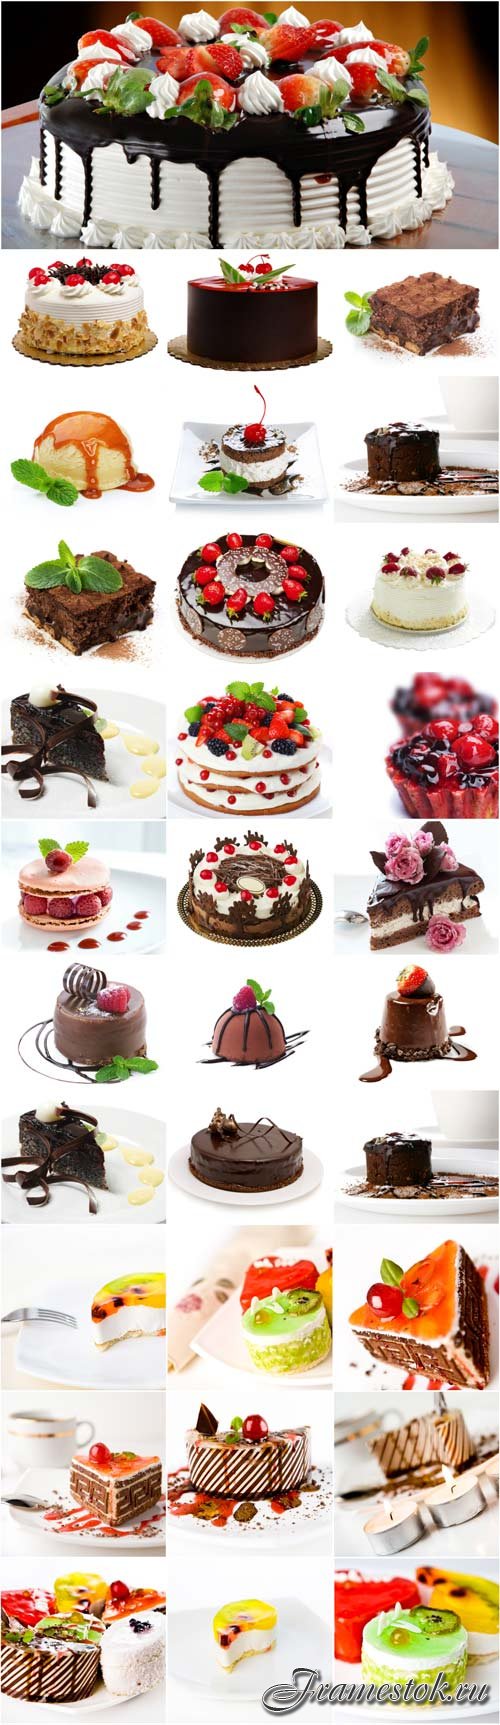 Sweet dessert - cakes and pies